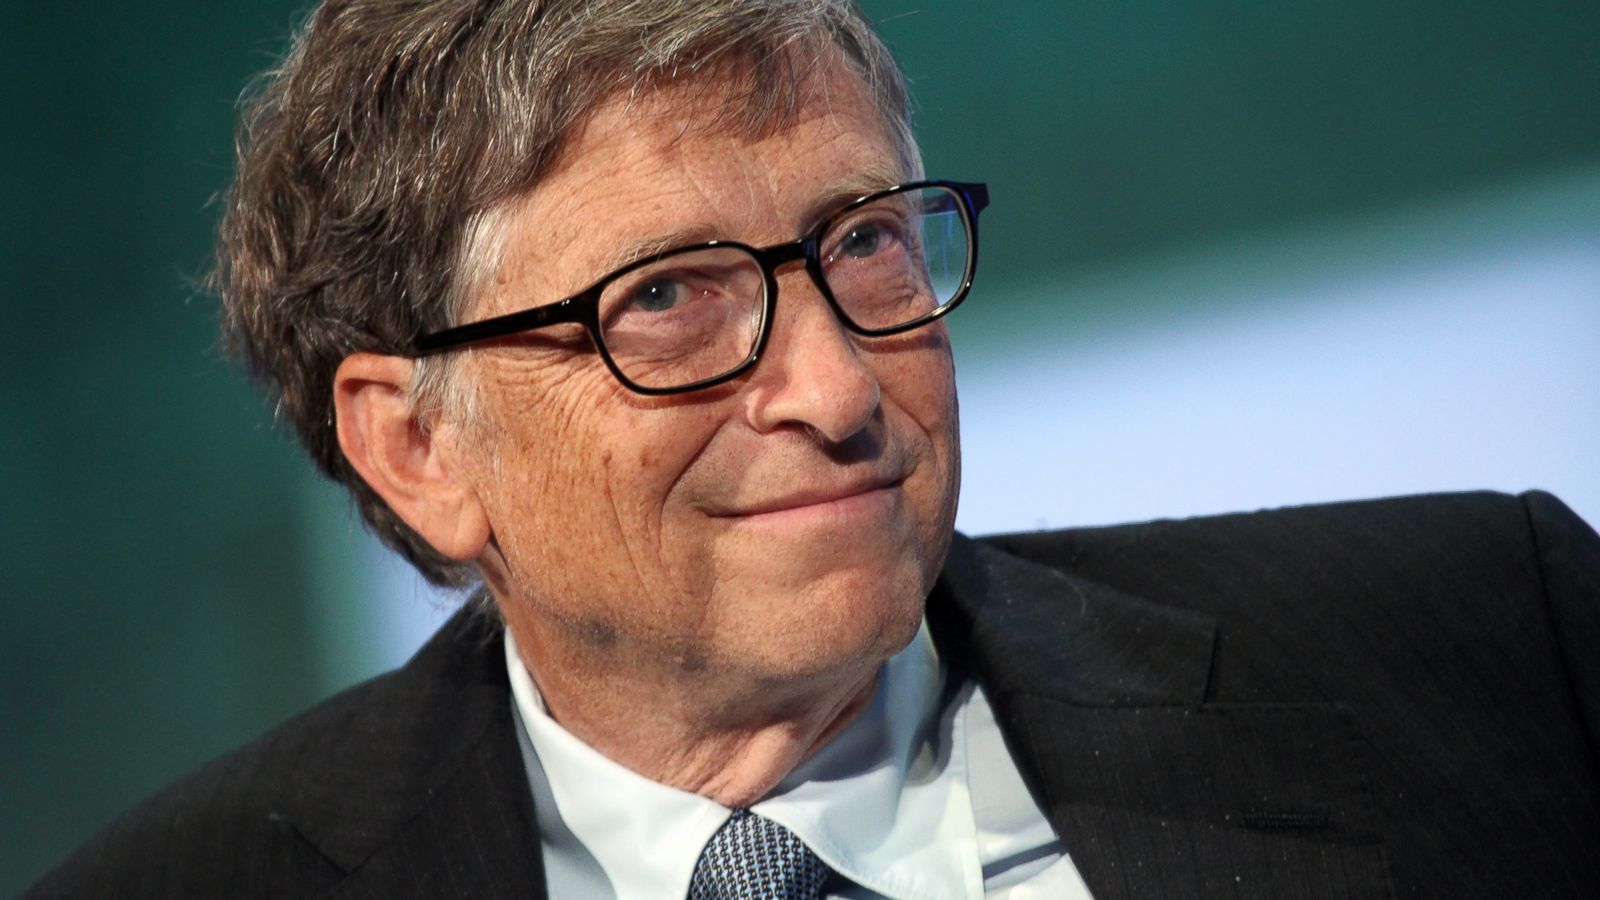 LV Owner is Richer Than Bill Gates! - July 19, 2019